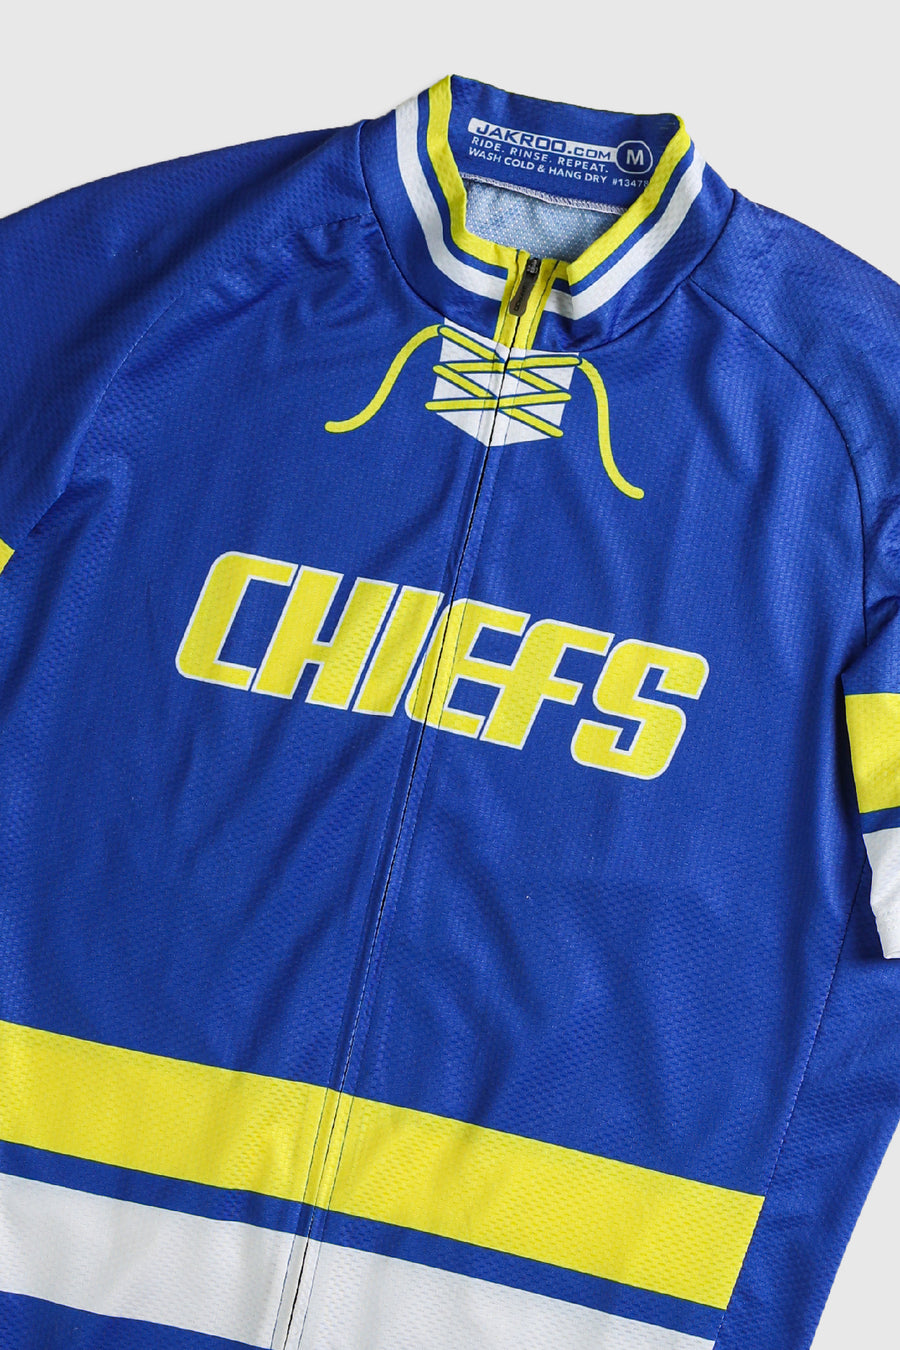 Chiefs Cycling Jersey